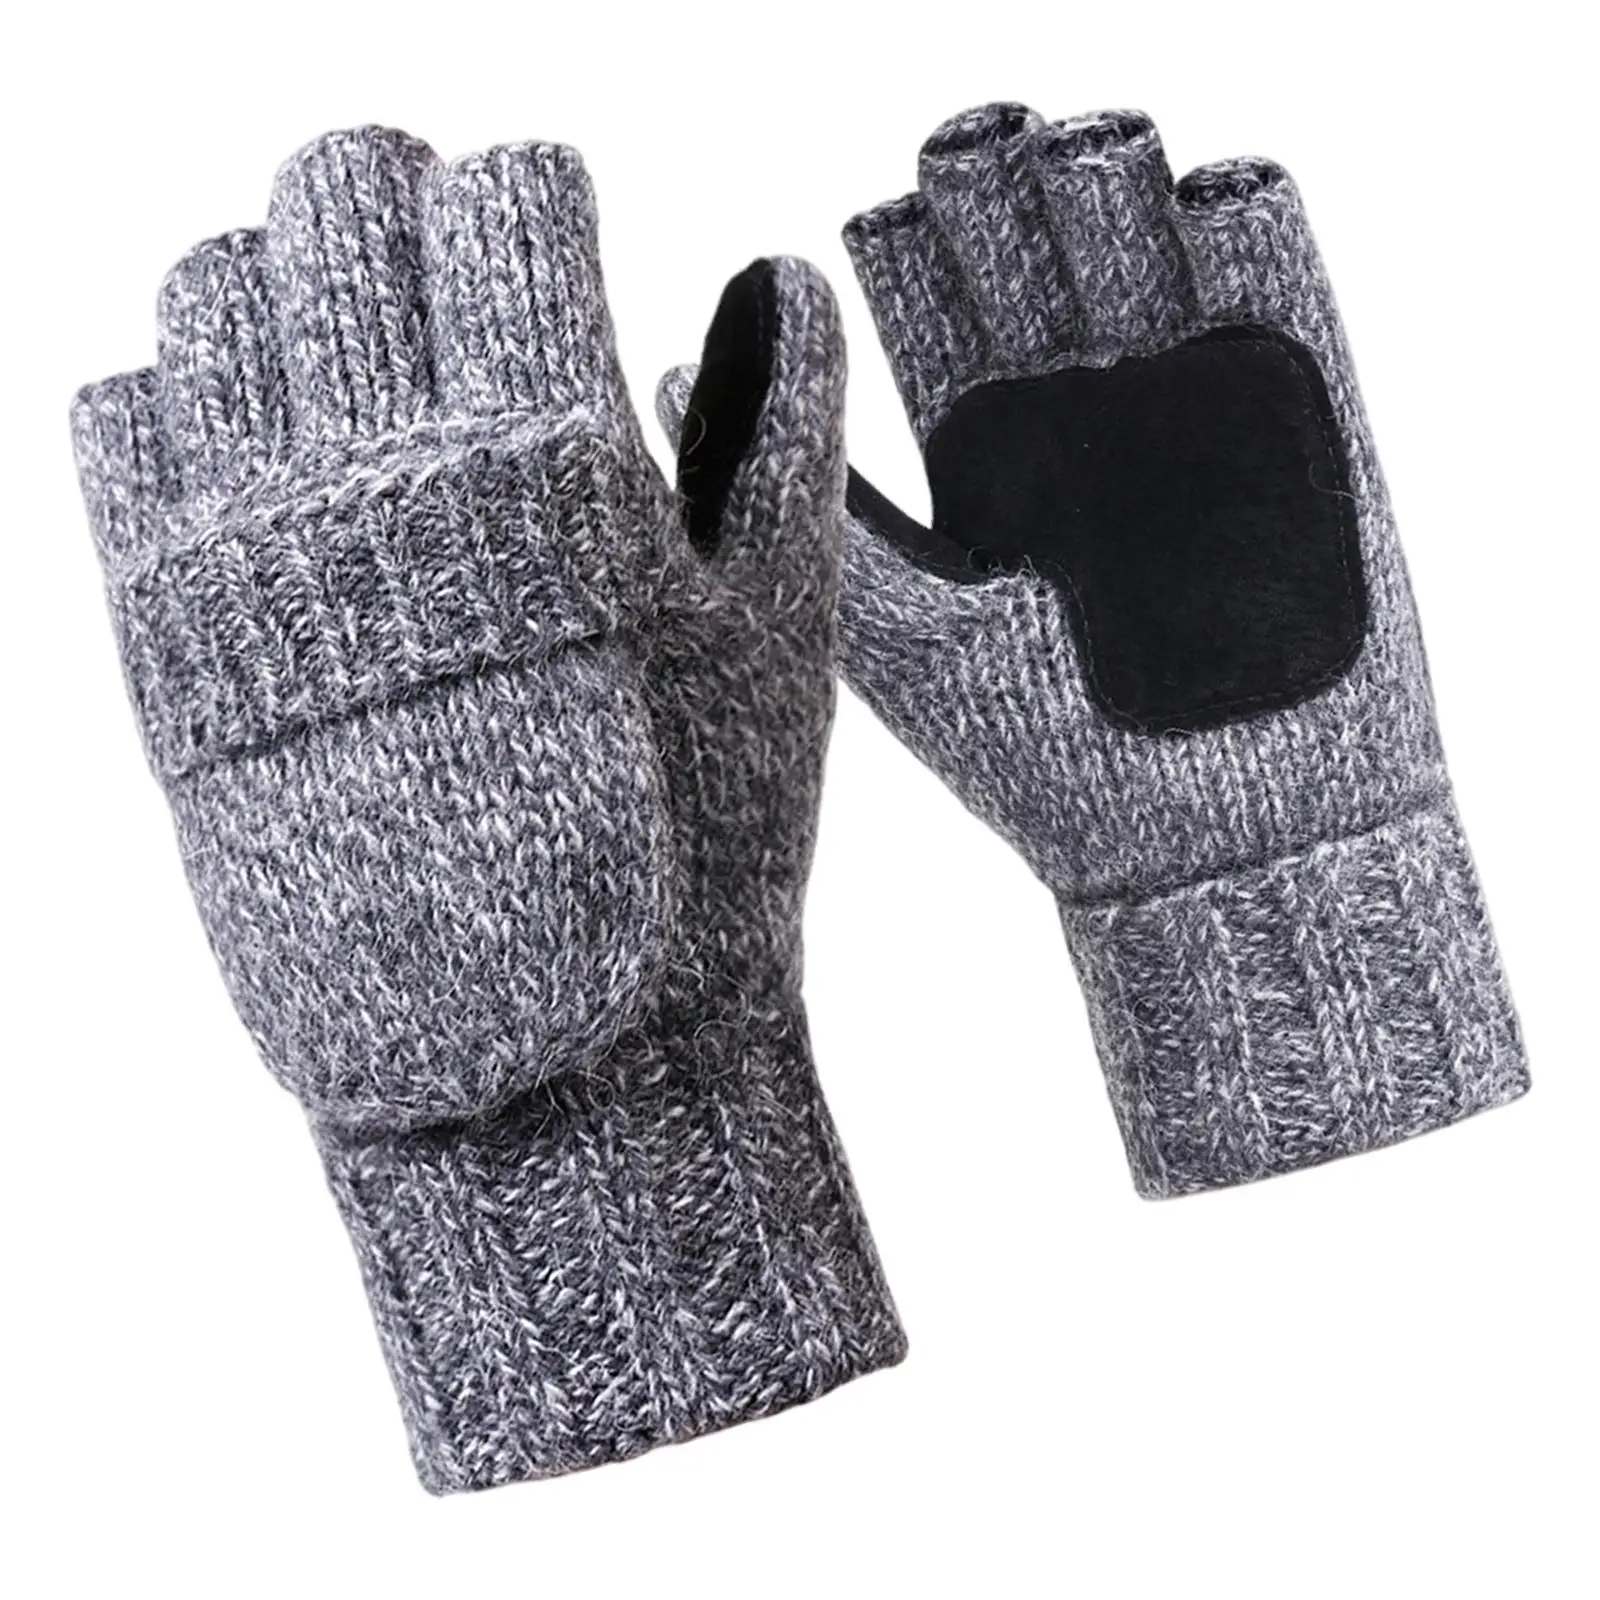 Flip Half Finger  Cashmere Stretchy Knitting Thick Fingerless Gloves for Women Cycling Cold Weather Writing  Sports